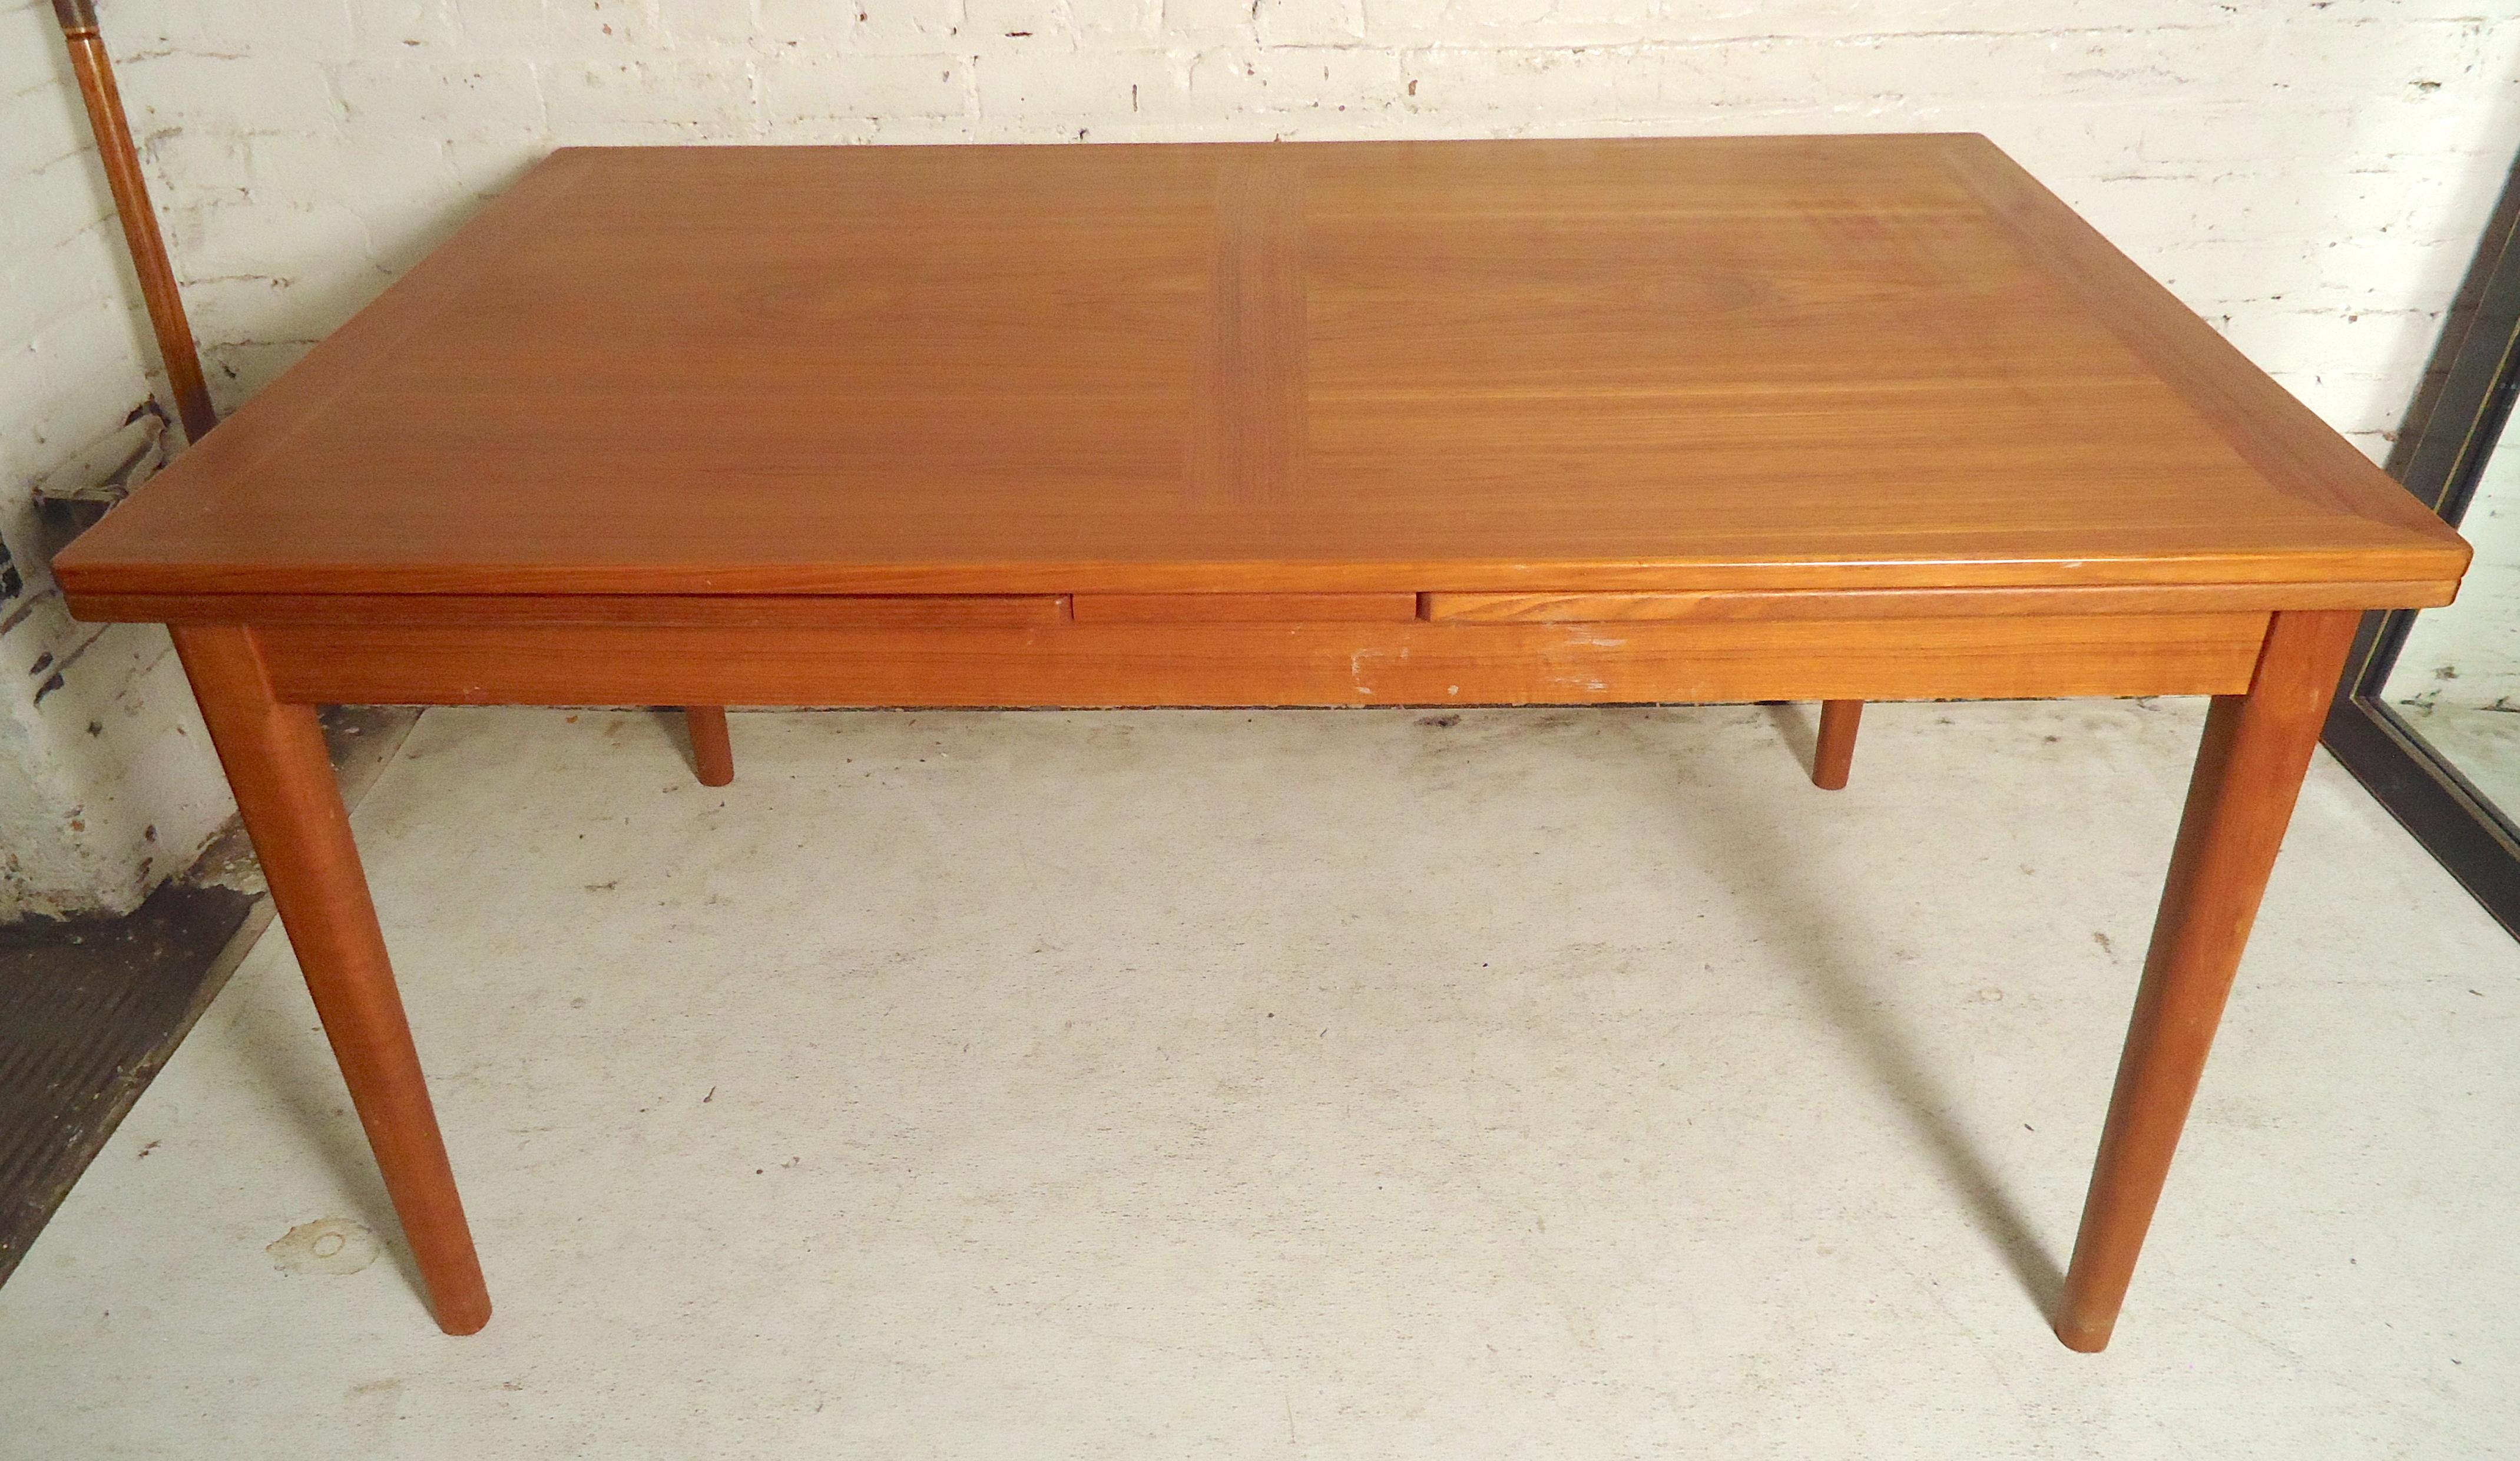 Teak dining table with two pullout / pull-out leaves. Both leaves stay under the tabletop and pullout / pull-out for four more feet of length.
Opens: 55-102